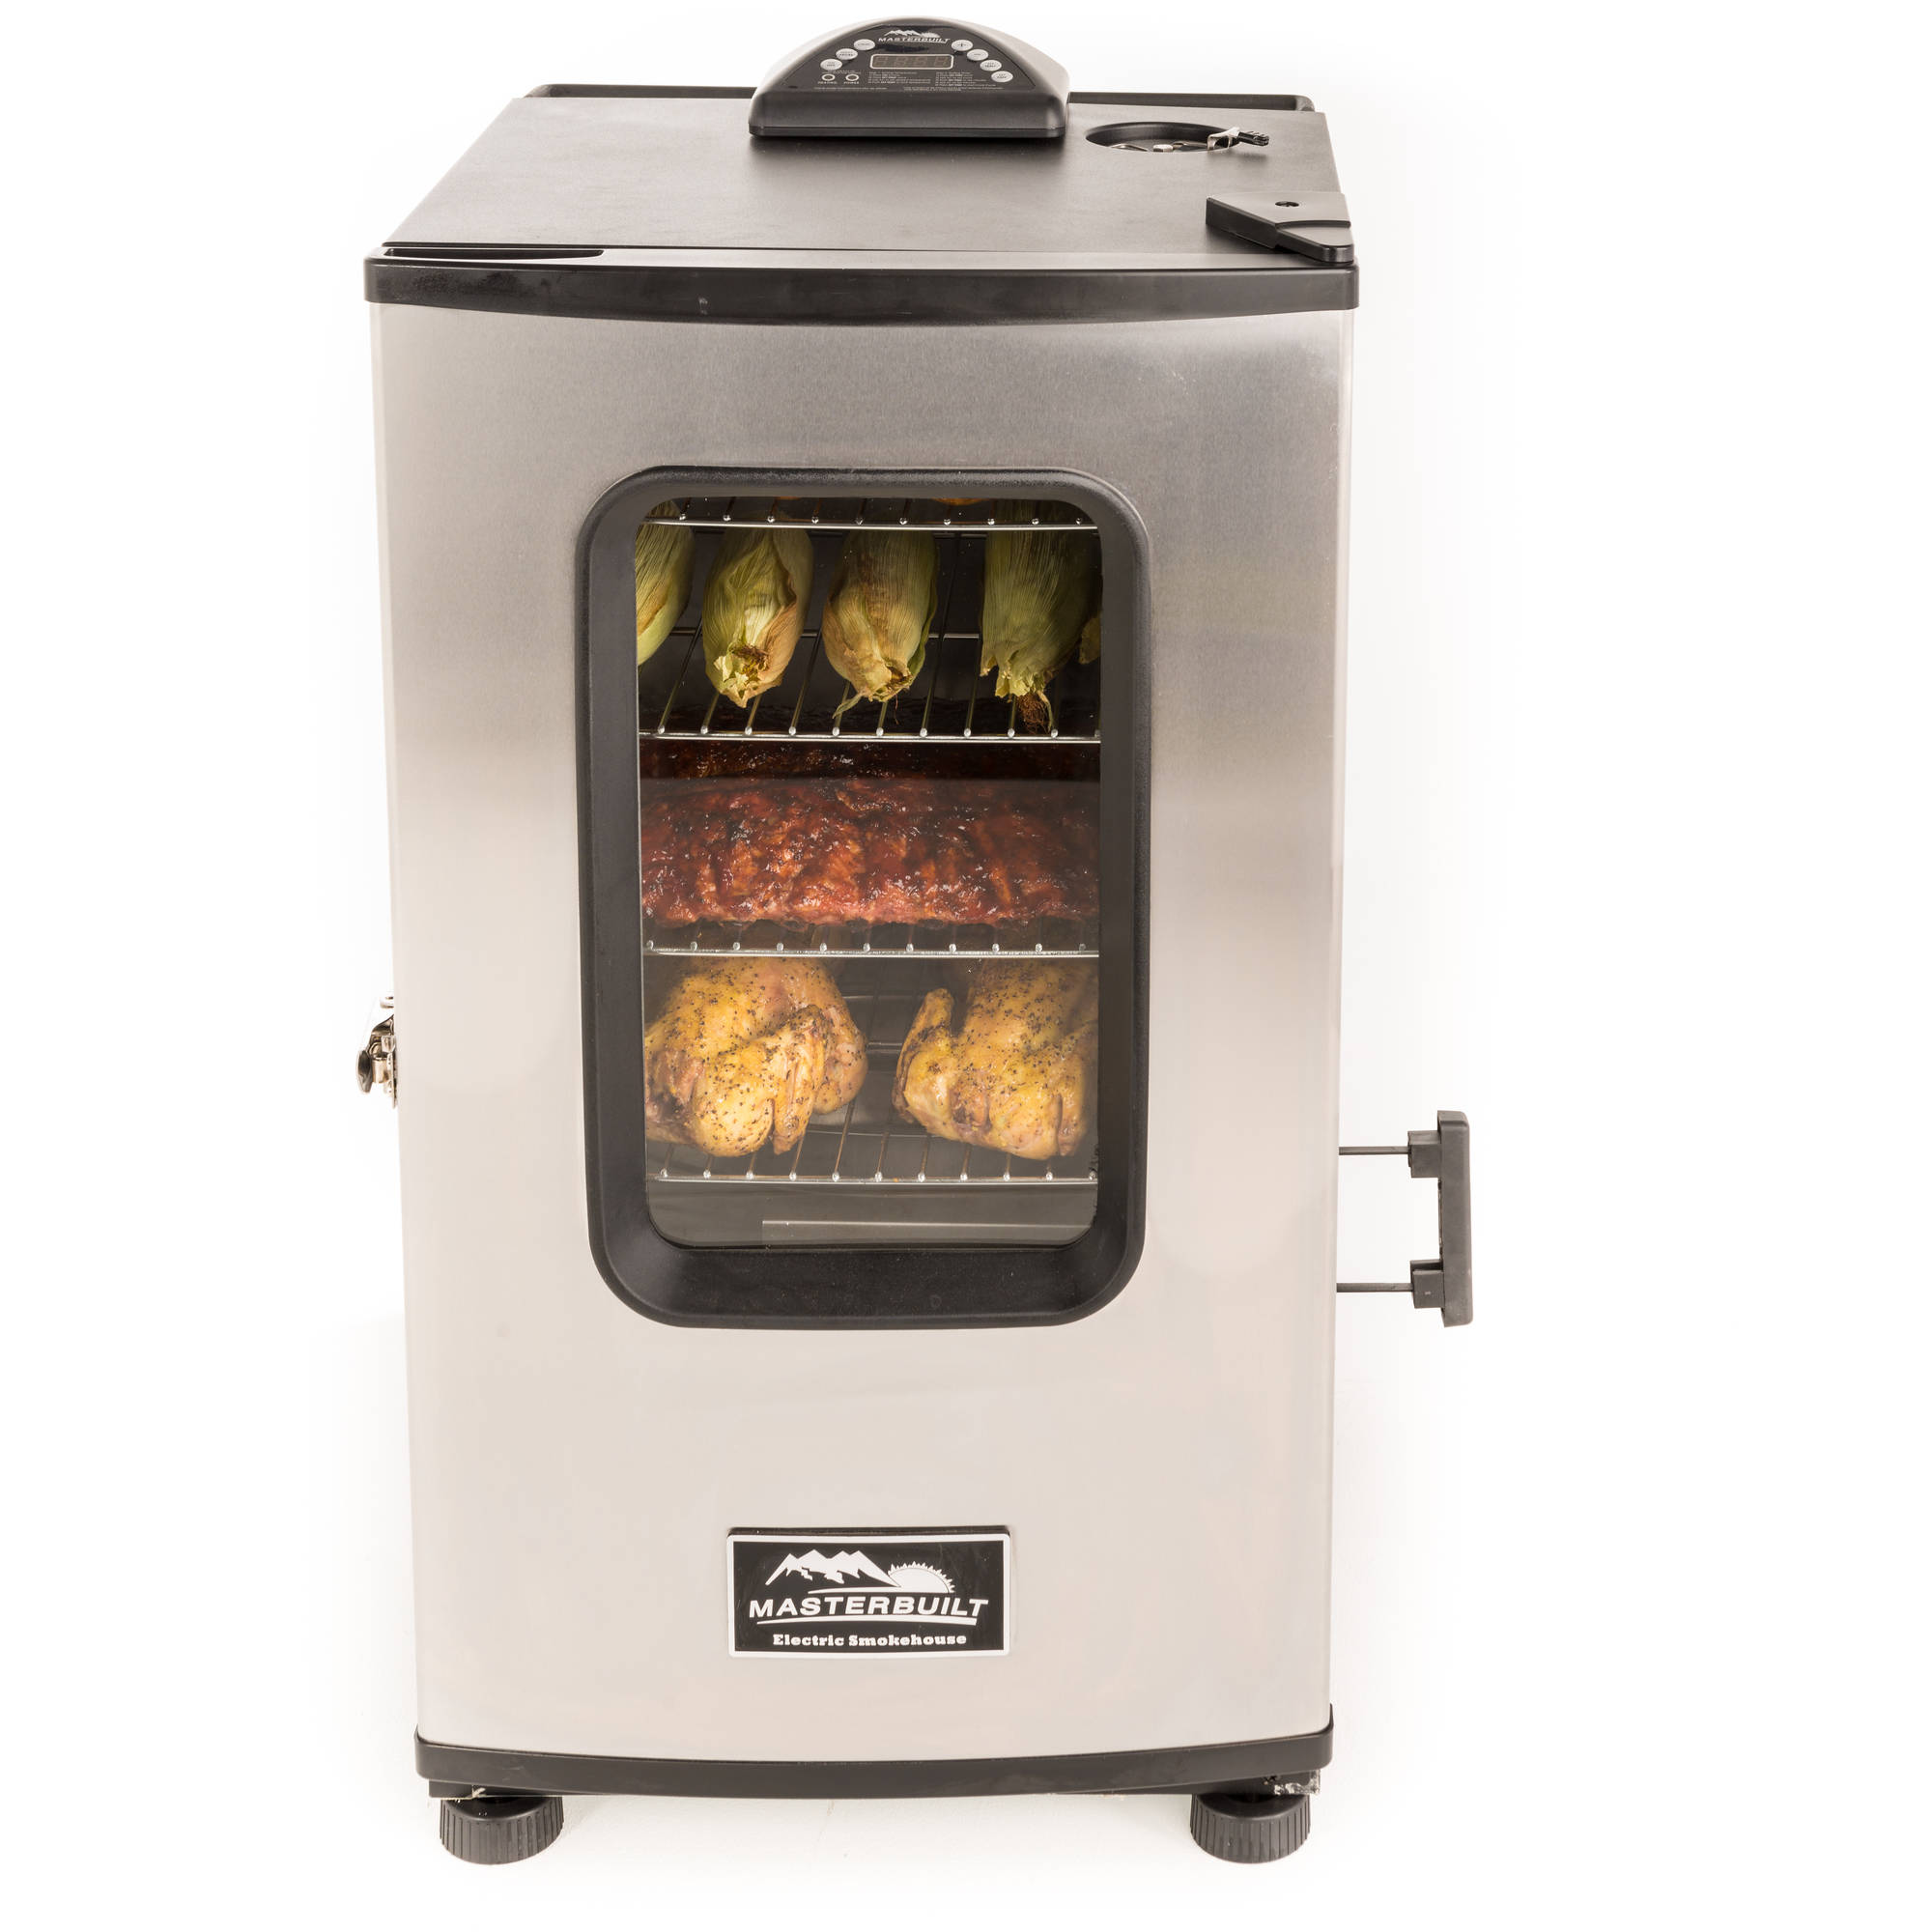 Masterbuilt 30" Electric Smoker with Window - image 4 of 5